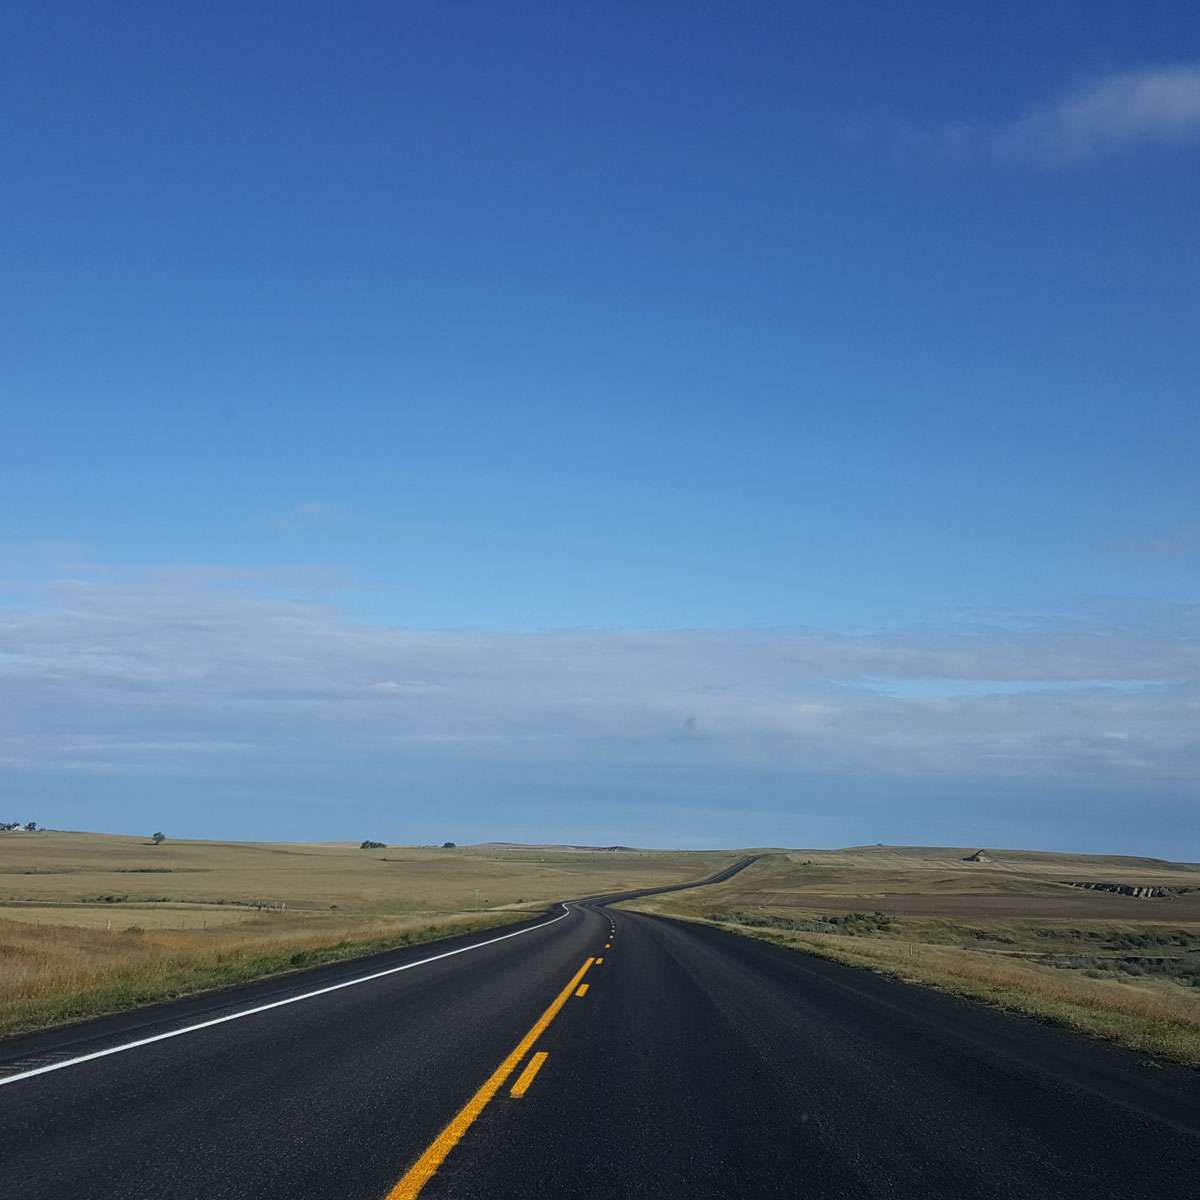 Though the open prairie in this image gives little clue to the vastness of the land the highway leading into the distance for miles gives the viewer that sense of depth and scale.